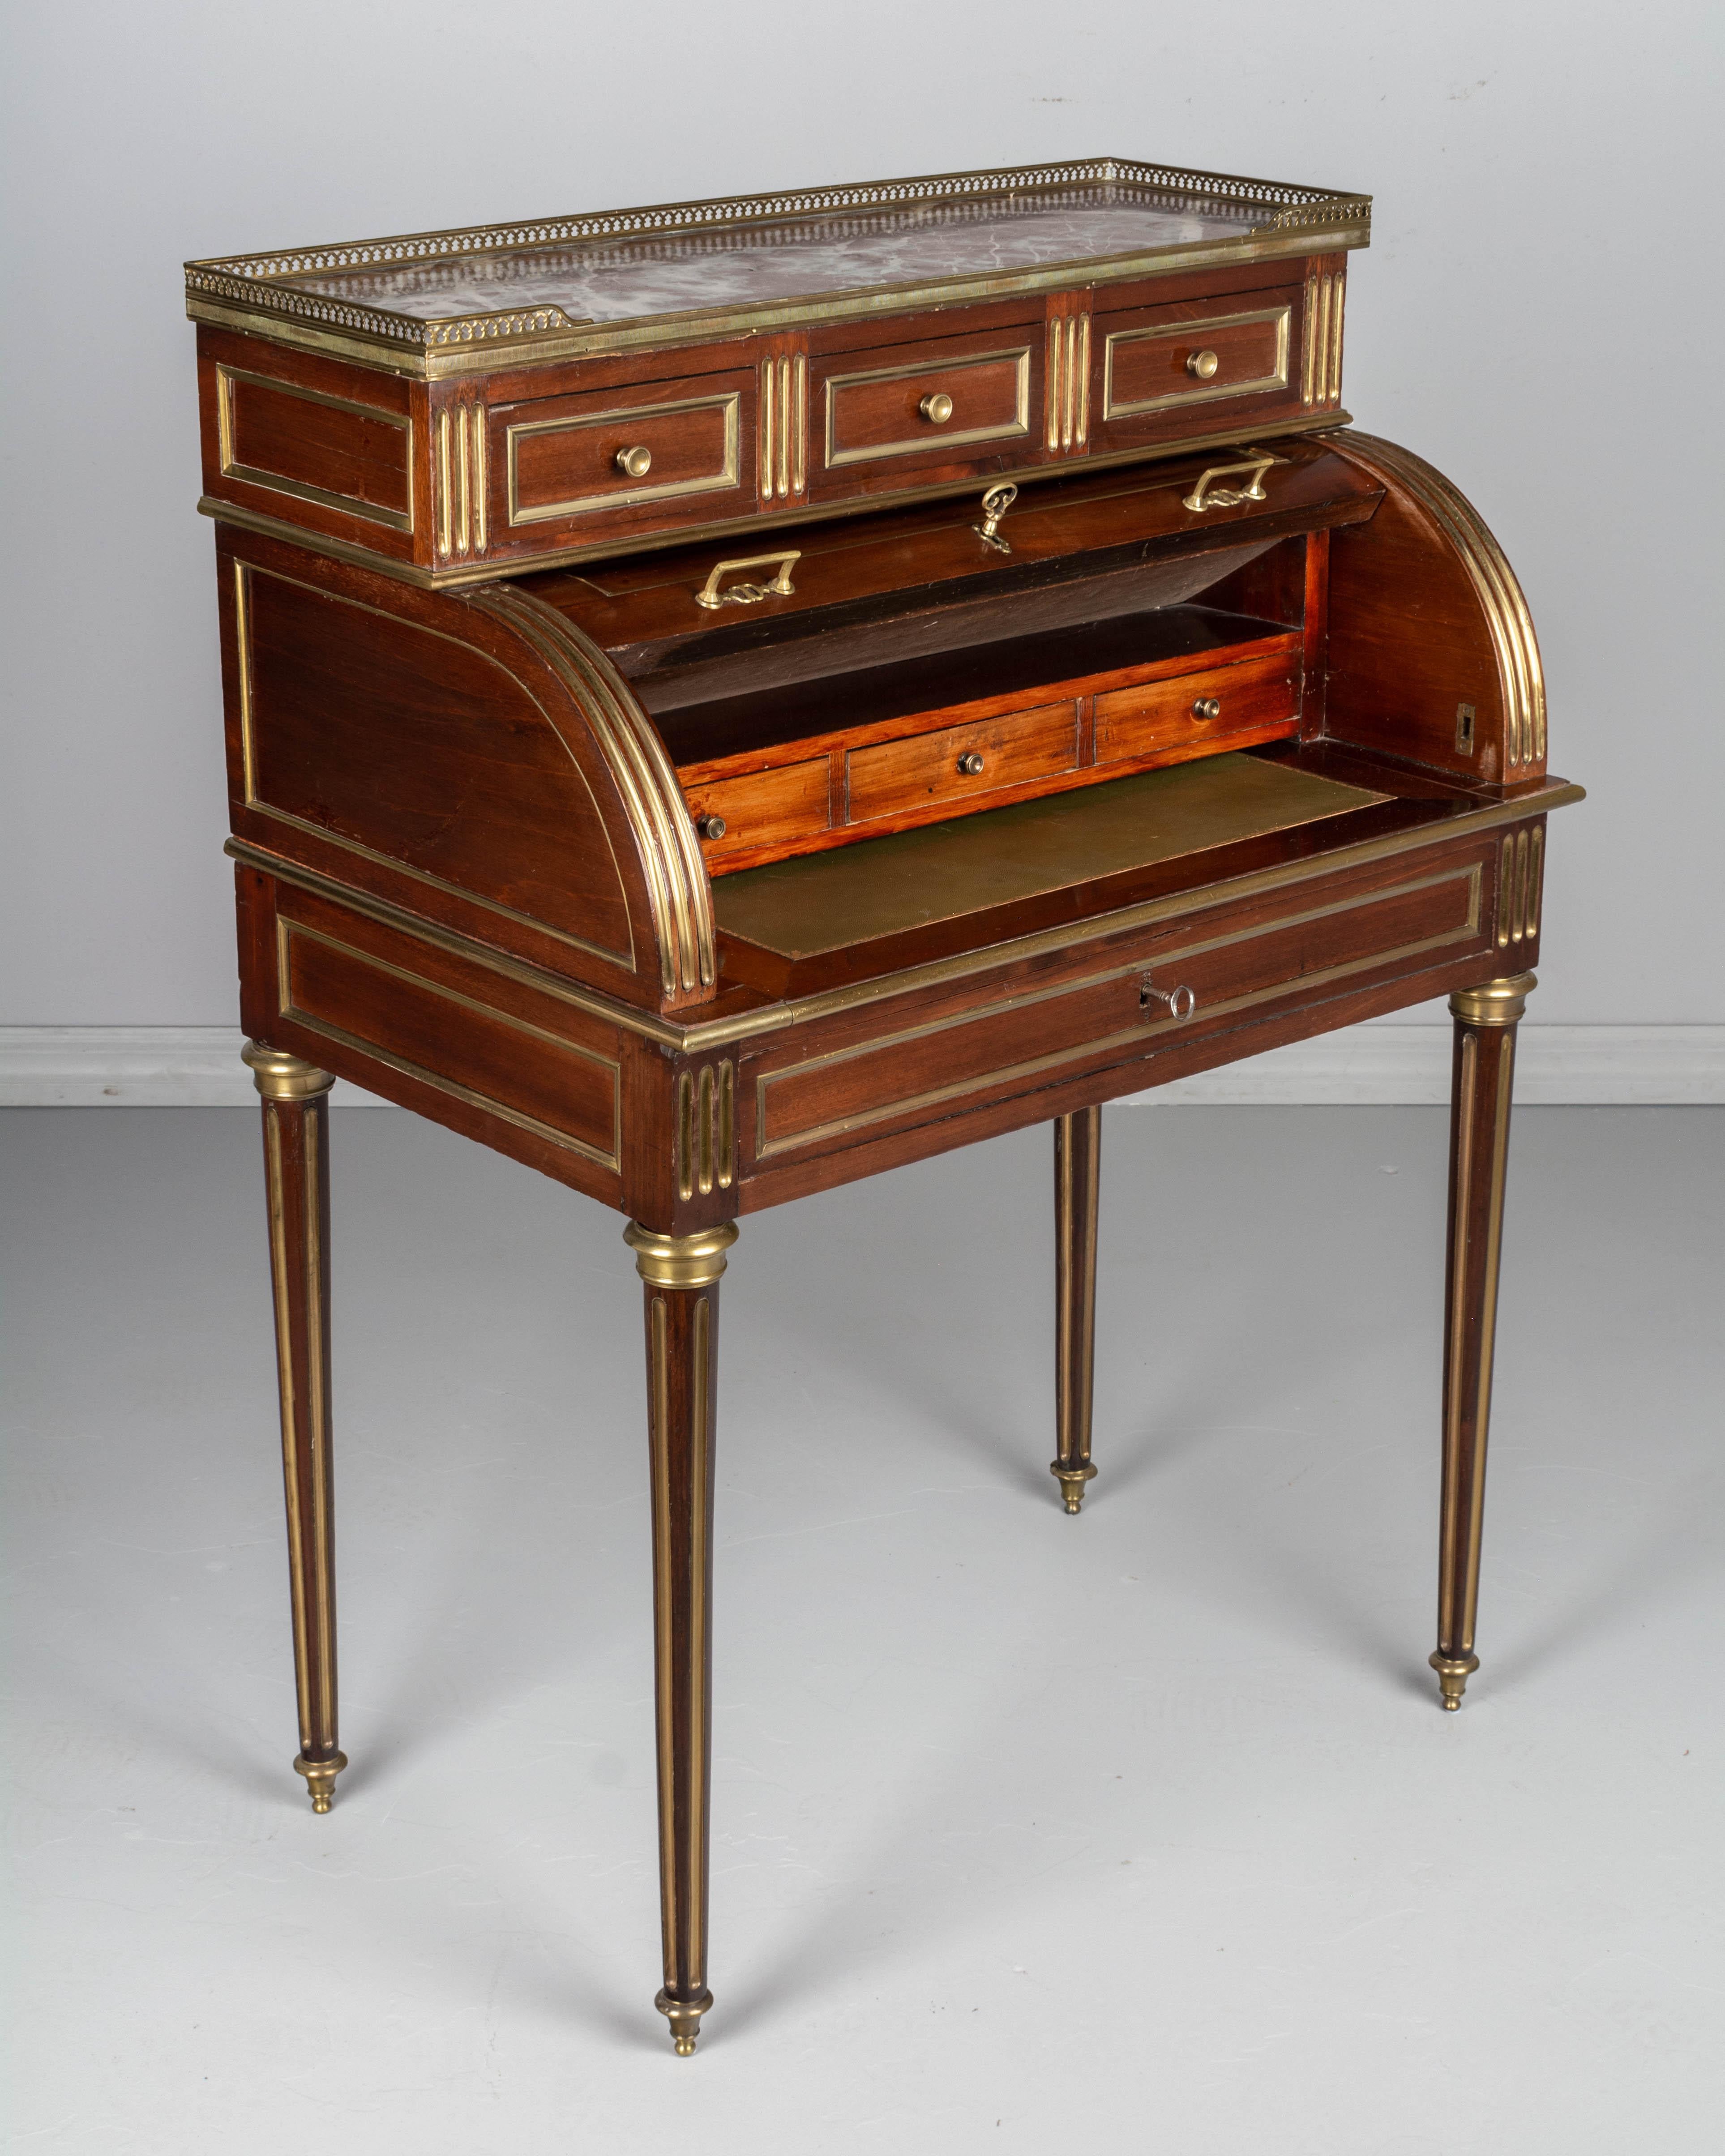 A 19th century Louis XVI style French bureau à cylindre, or roll top desk, made of solid and veneer of mahogany with brass trim and hardware. Good proportions and nice profile to this small desk. Roll top opens to a pull-out writing table with green